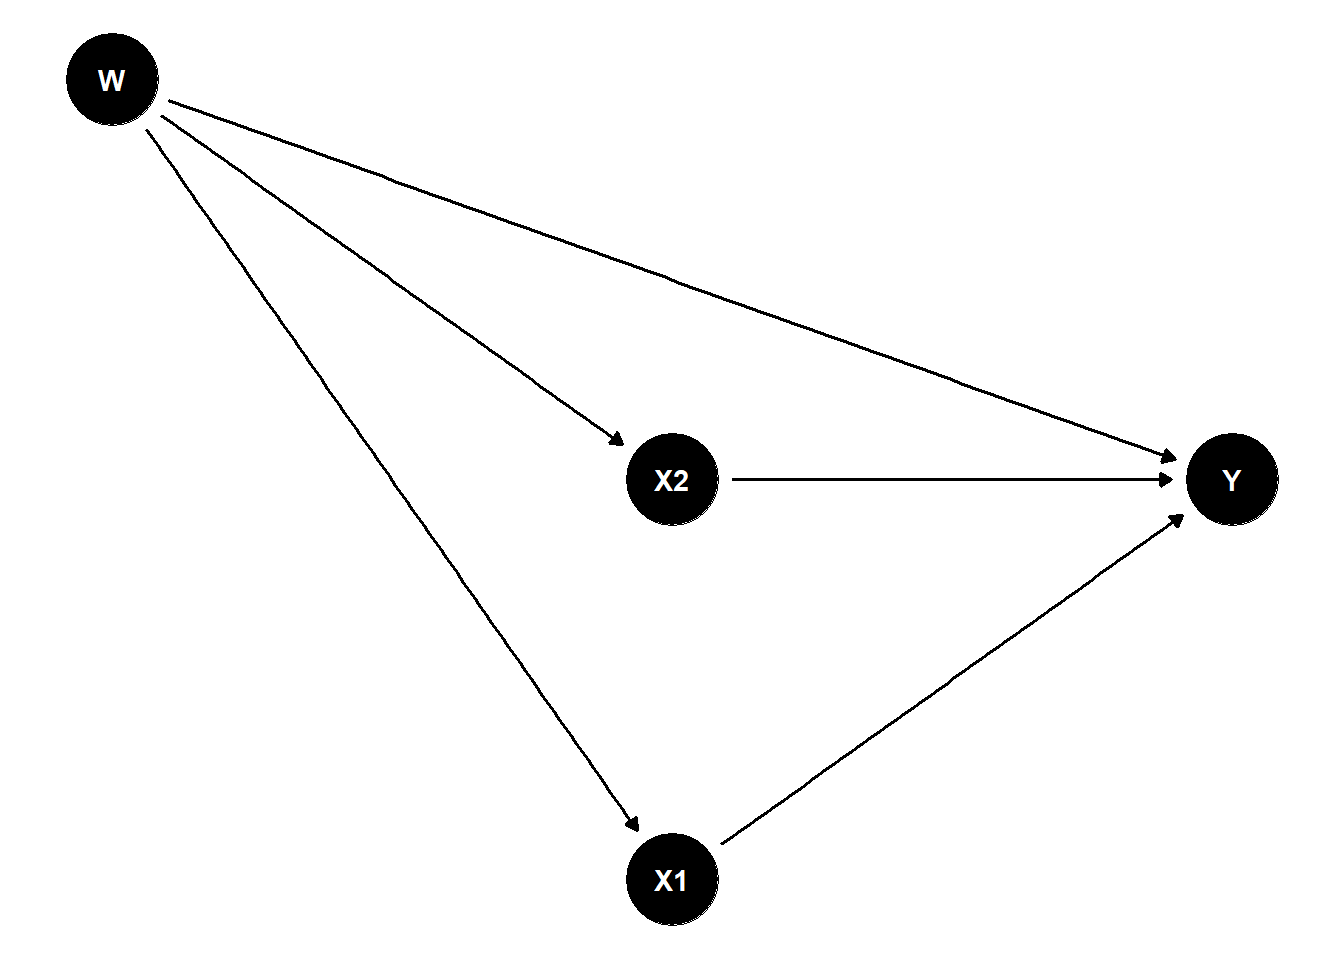 A causal diagram with Y caused by X1, X2, and W, X1 caused by W, and X2 caused by W.